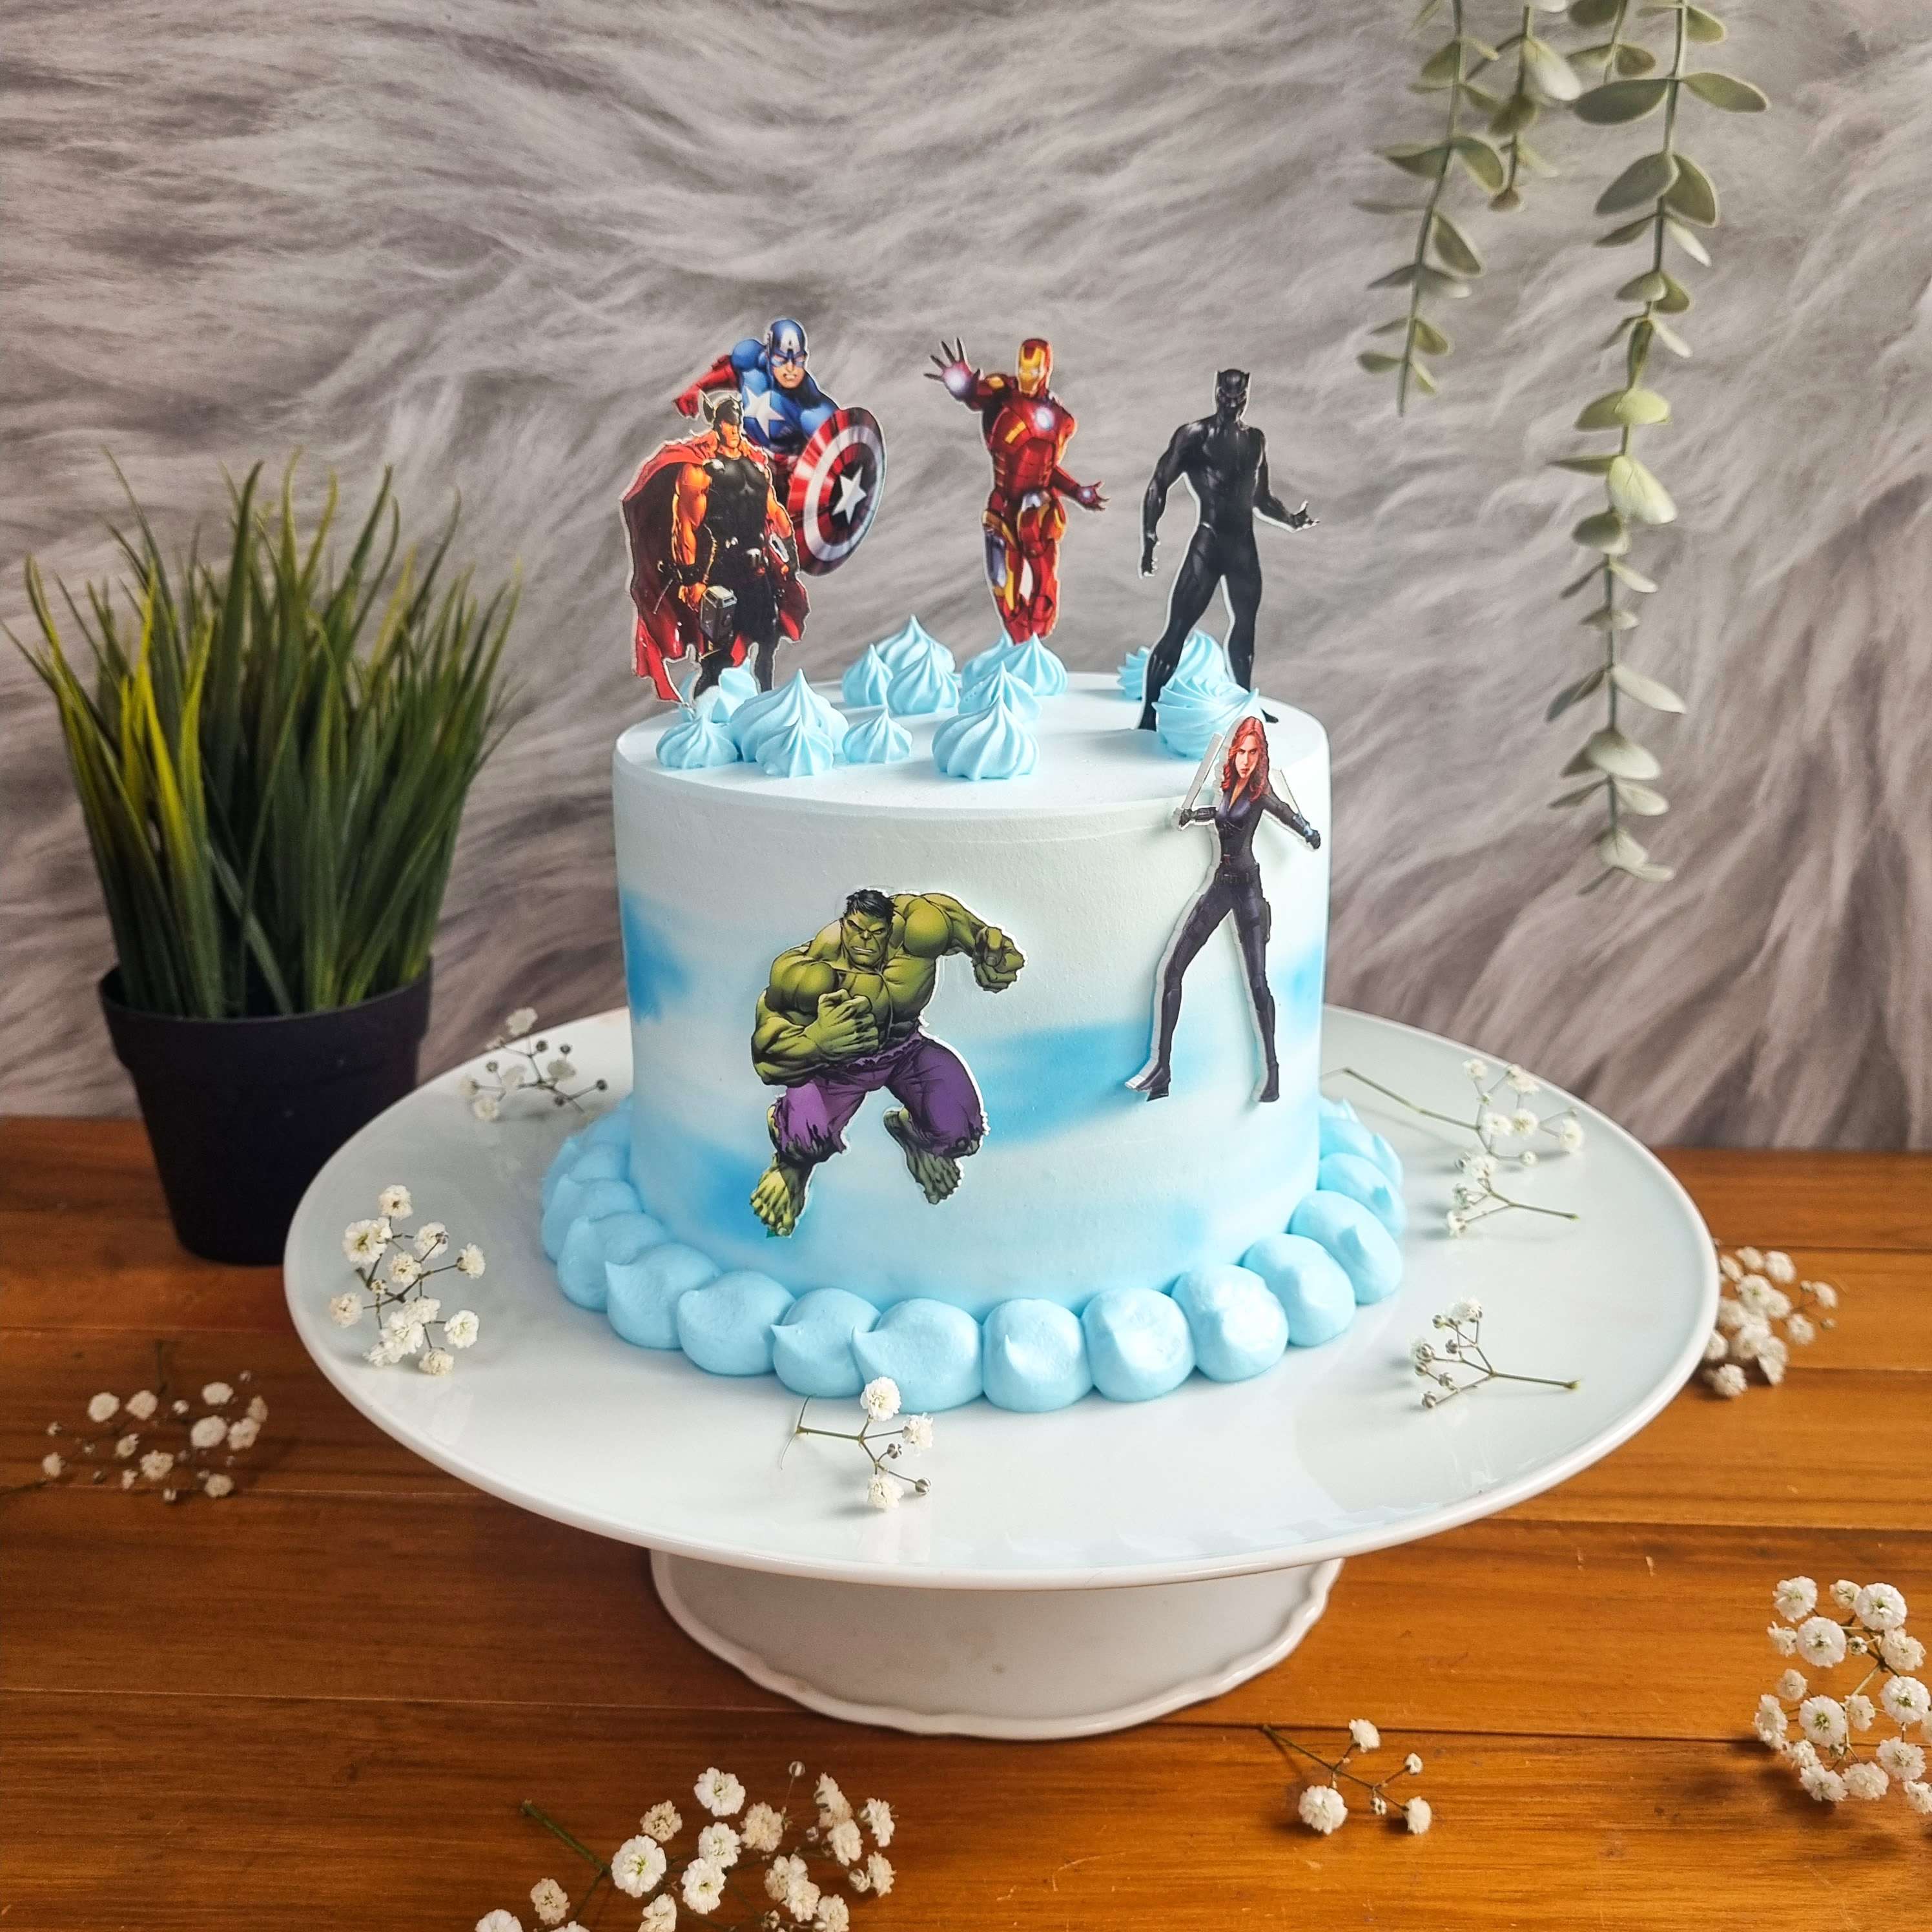 Avengers Birthday Cake Ideas Images (Pictures) | Avengers birthday cakes,  Superhero birthday cake, Marvel birthday cake